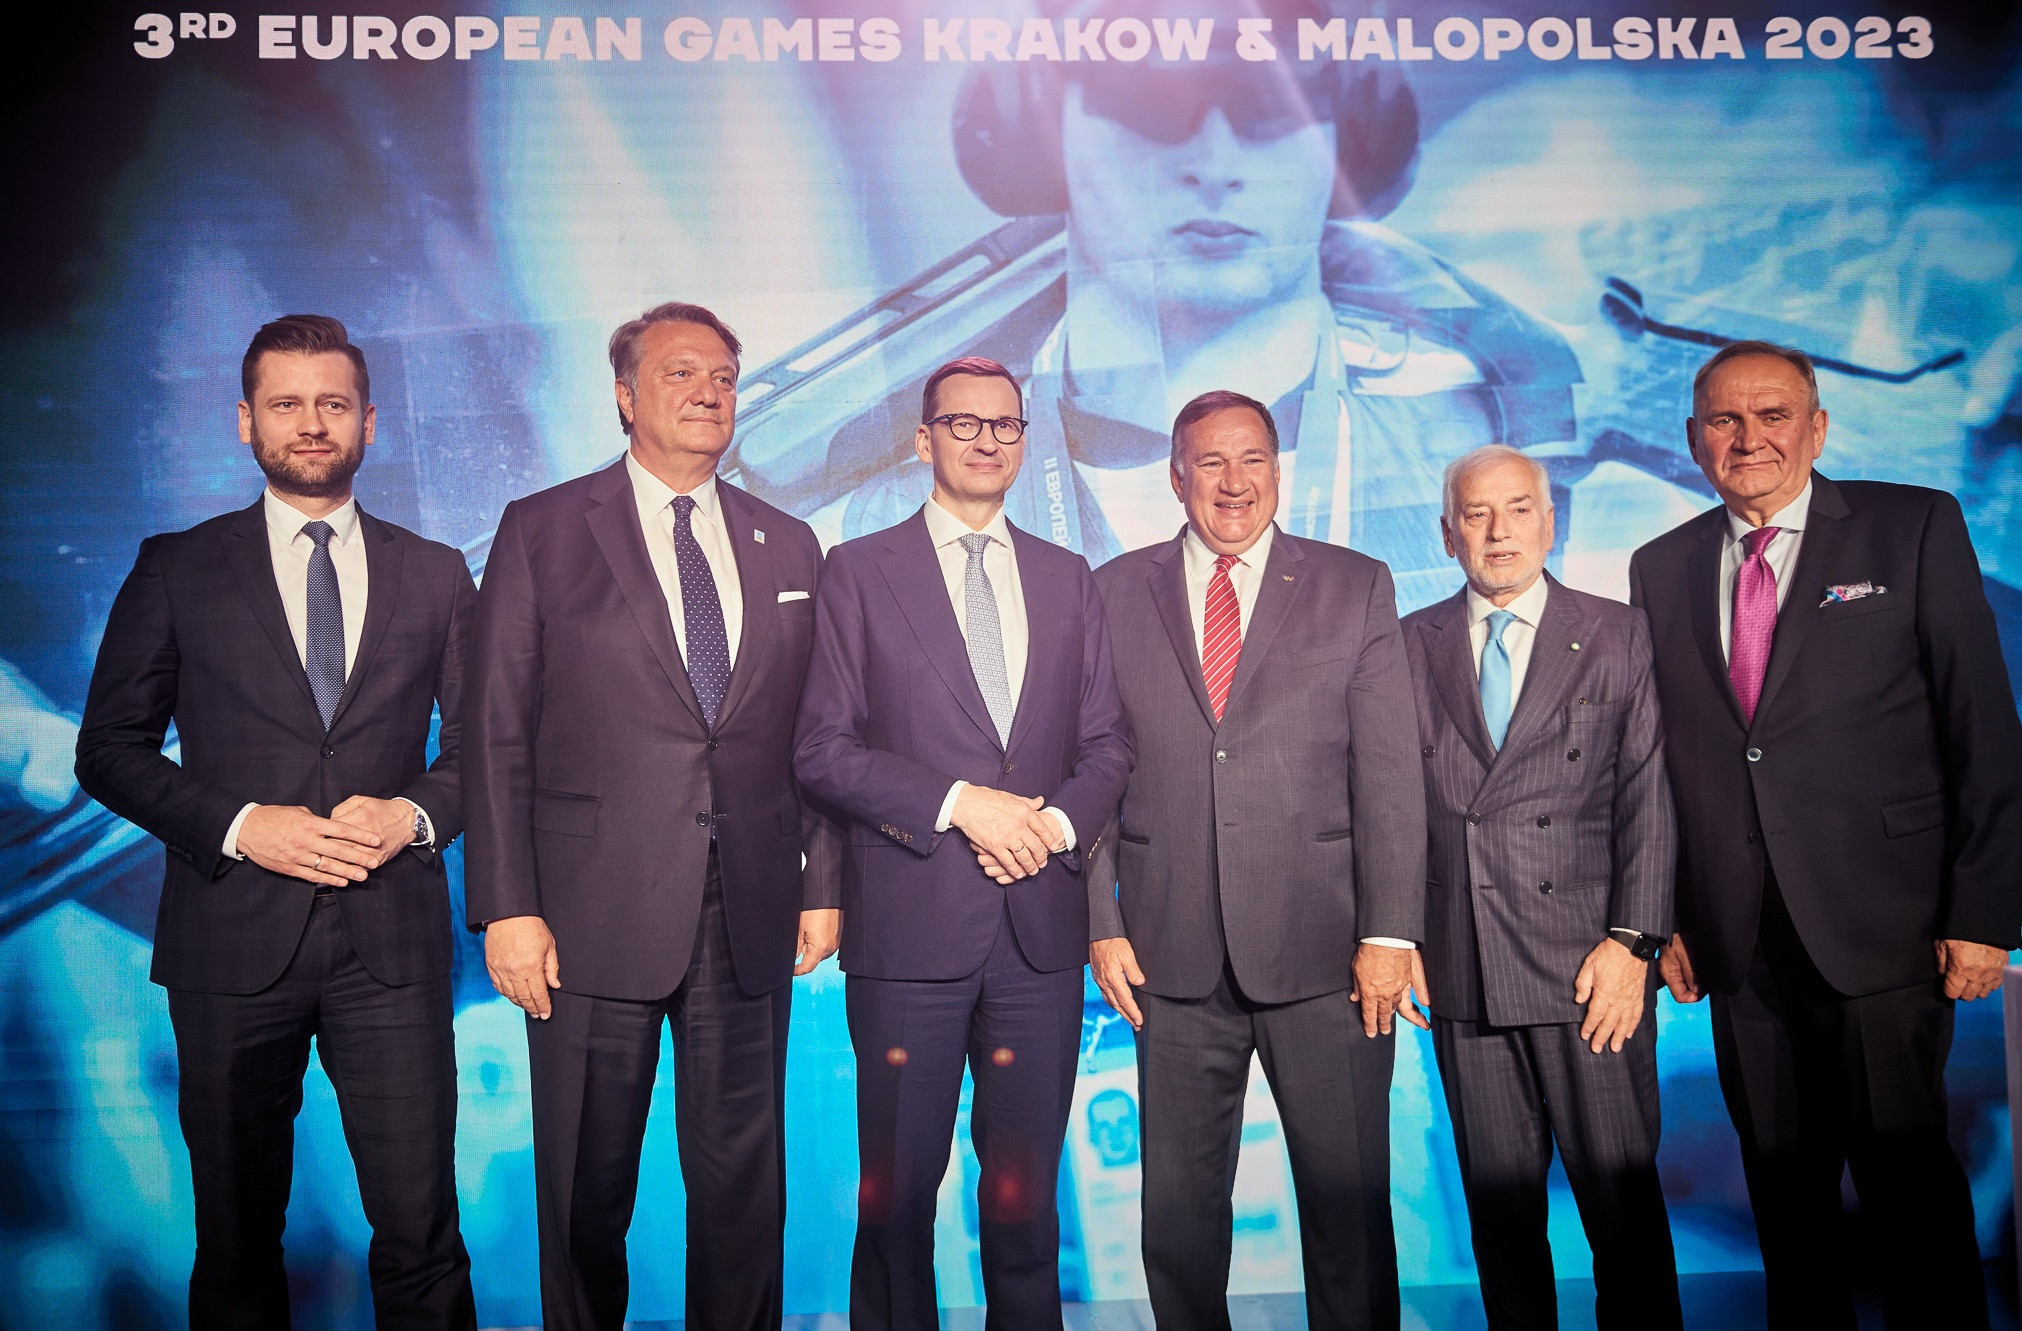 Reports on next year's European Games are expected at the General Assembly, after the Host City Contract was signed last month ©EOC